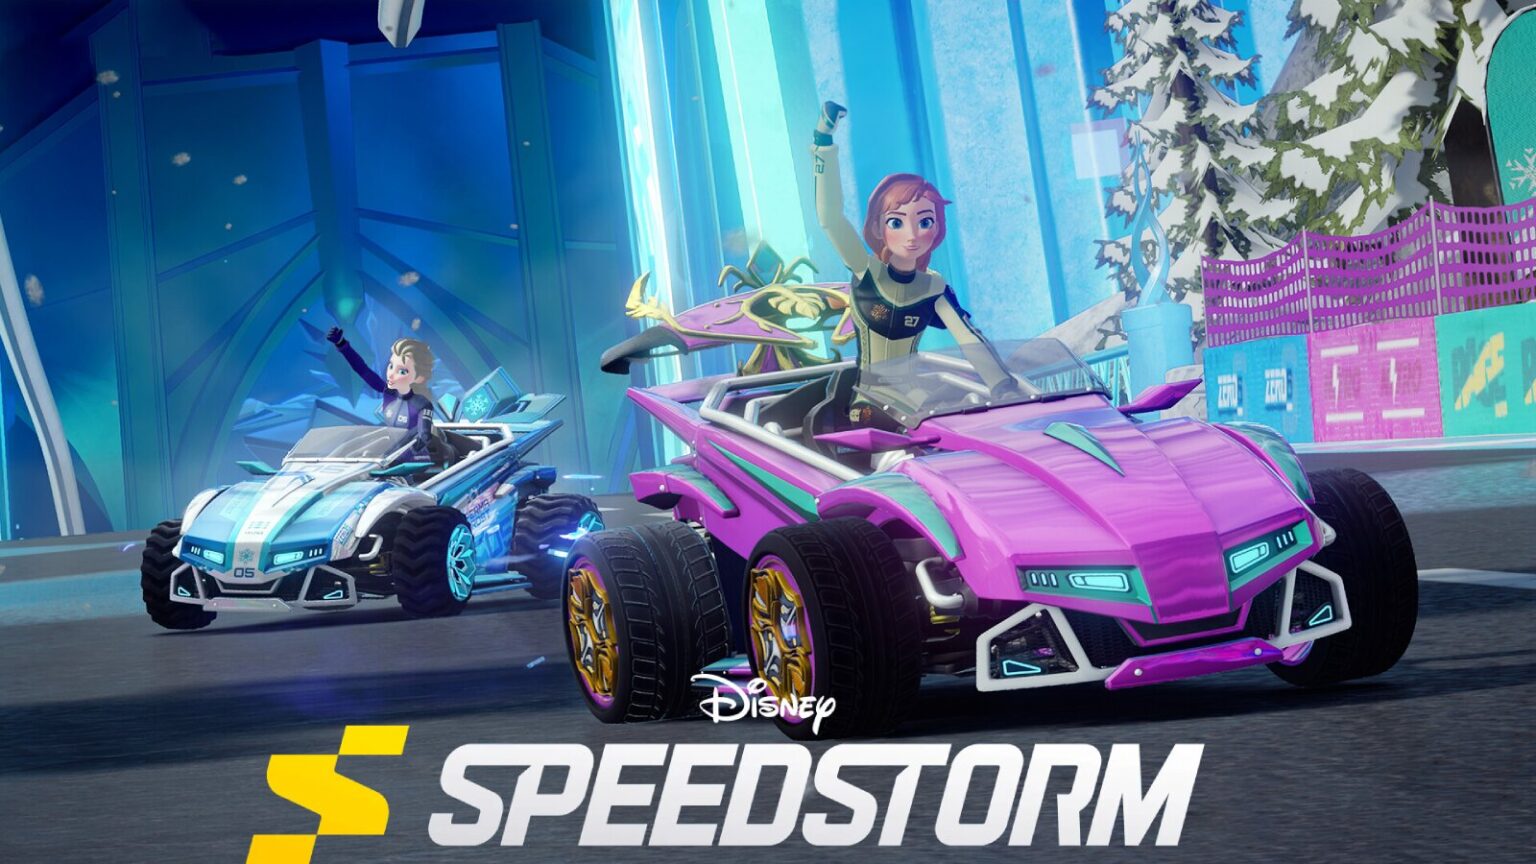 Two characters race futuristic cars in Disney Speedstorm Mobile game